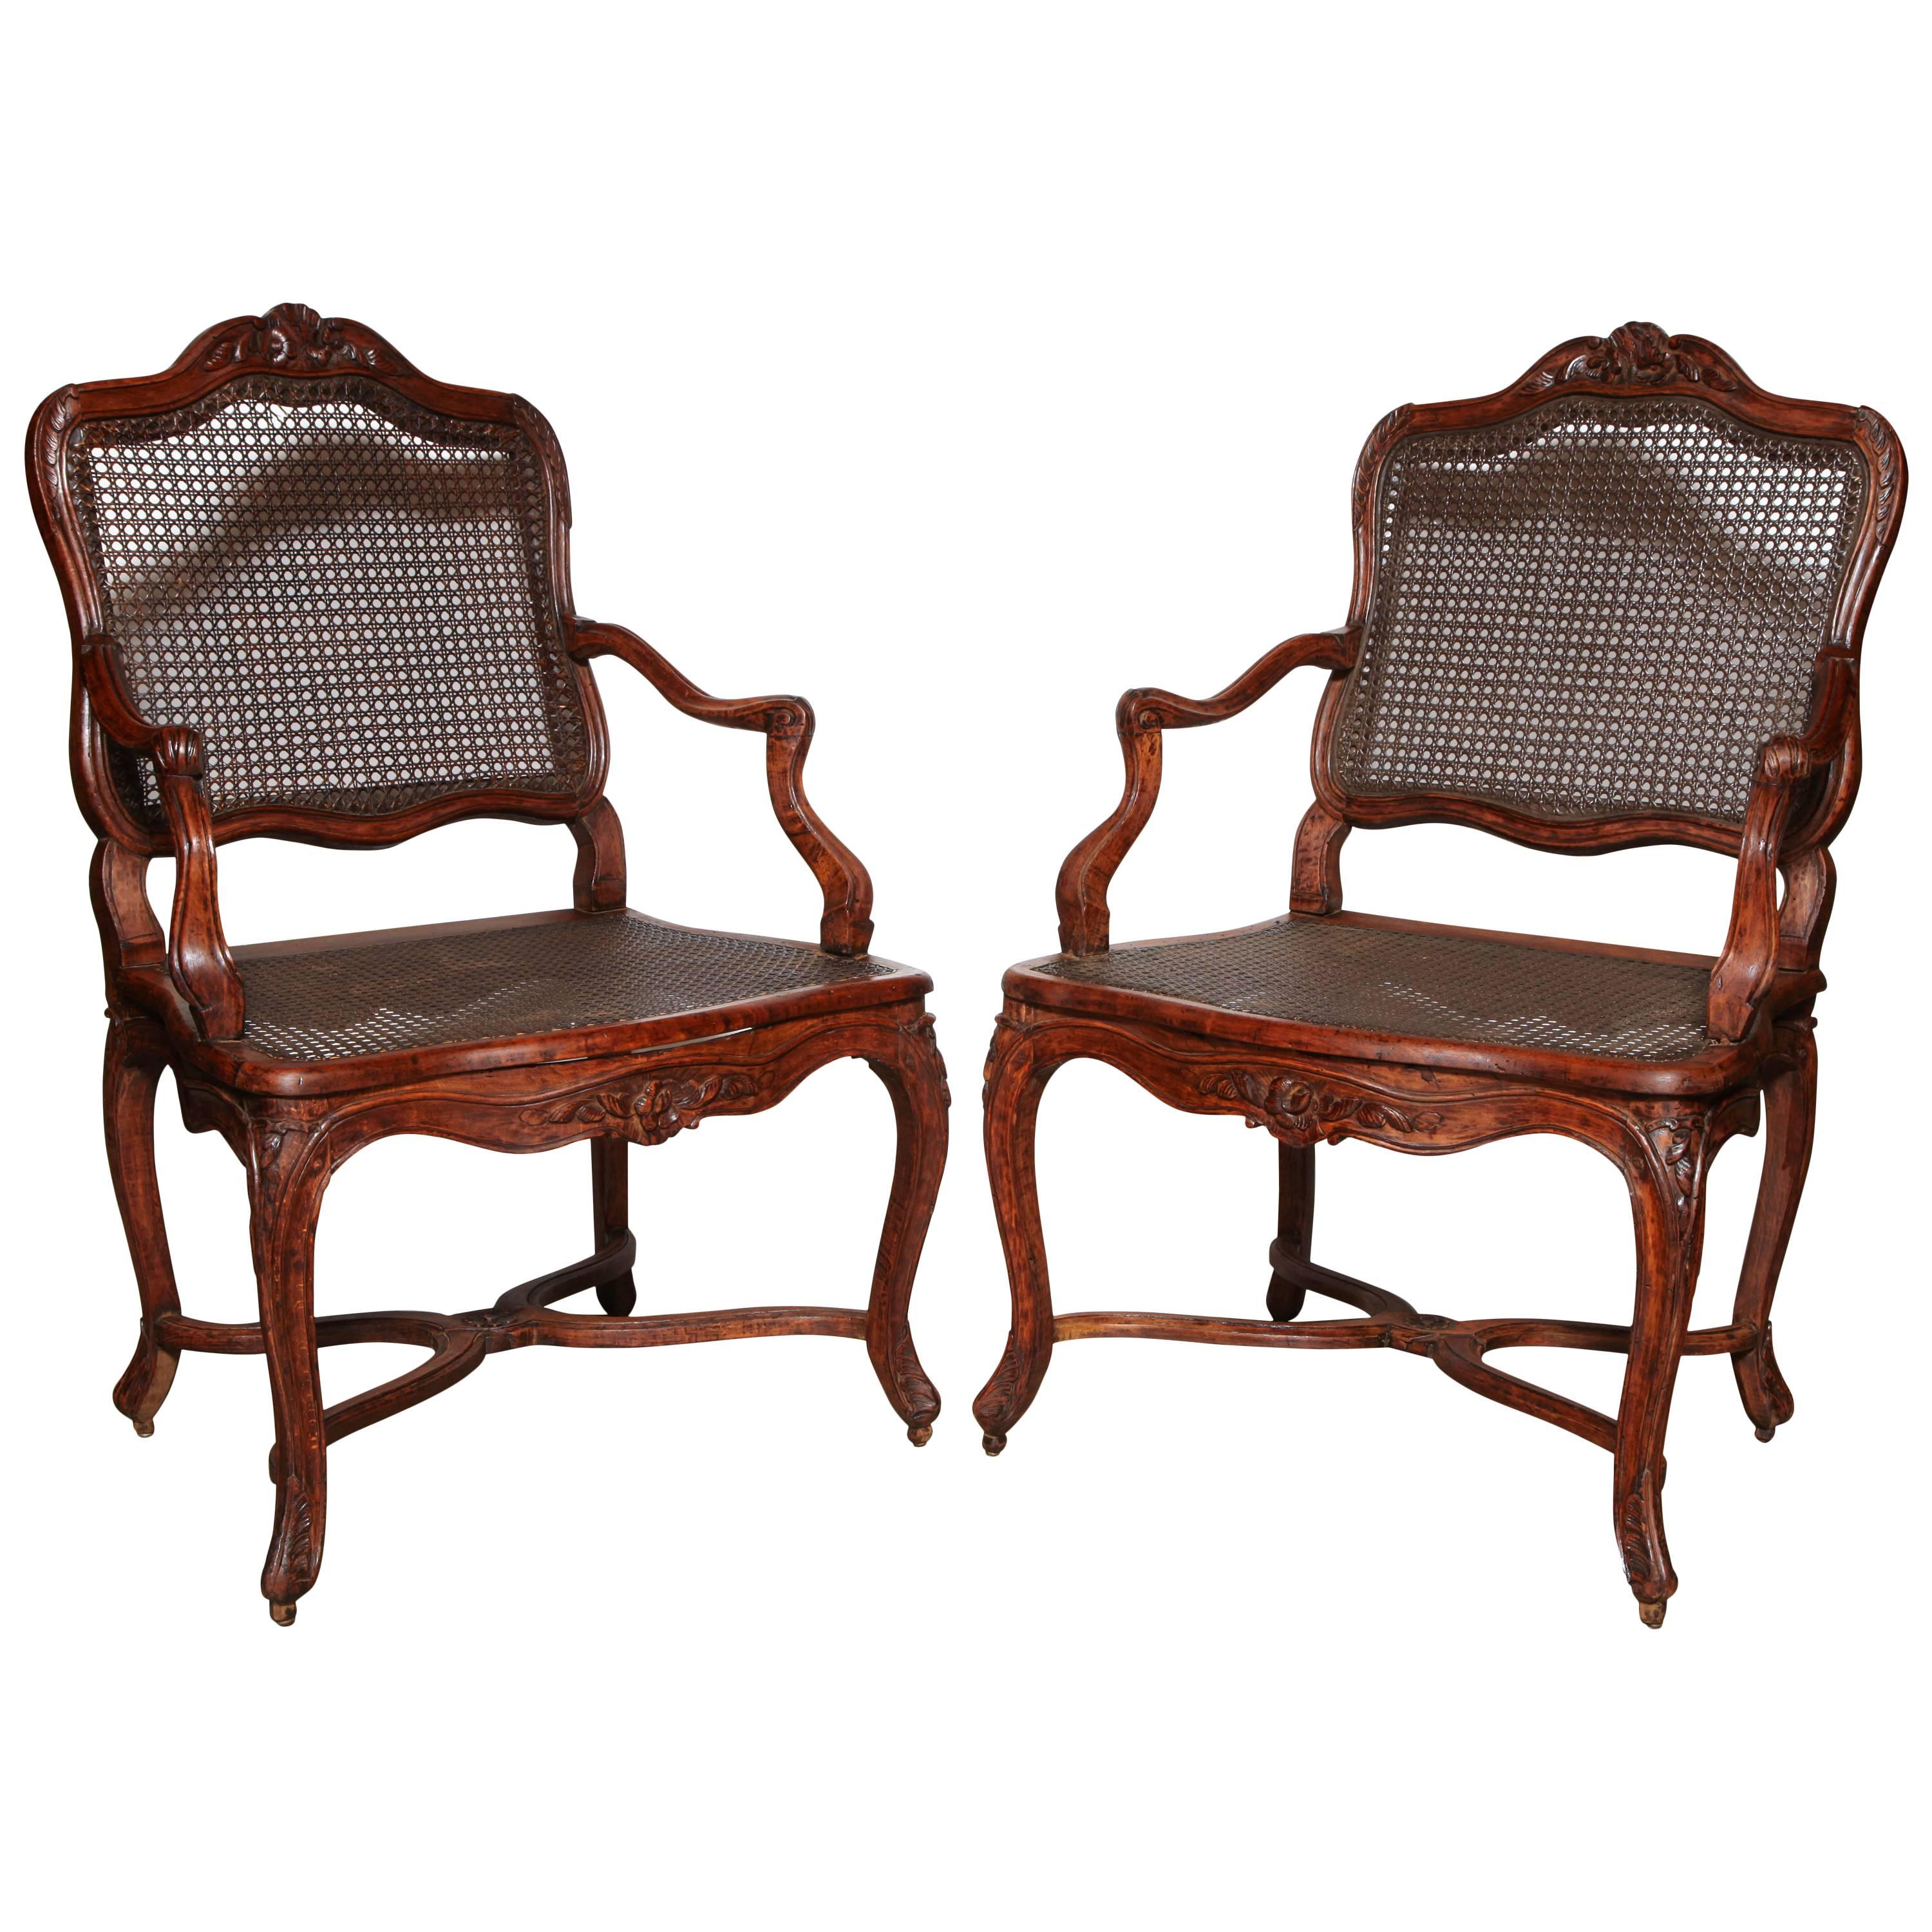 Pair of Regence Caned Fauteuils